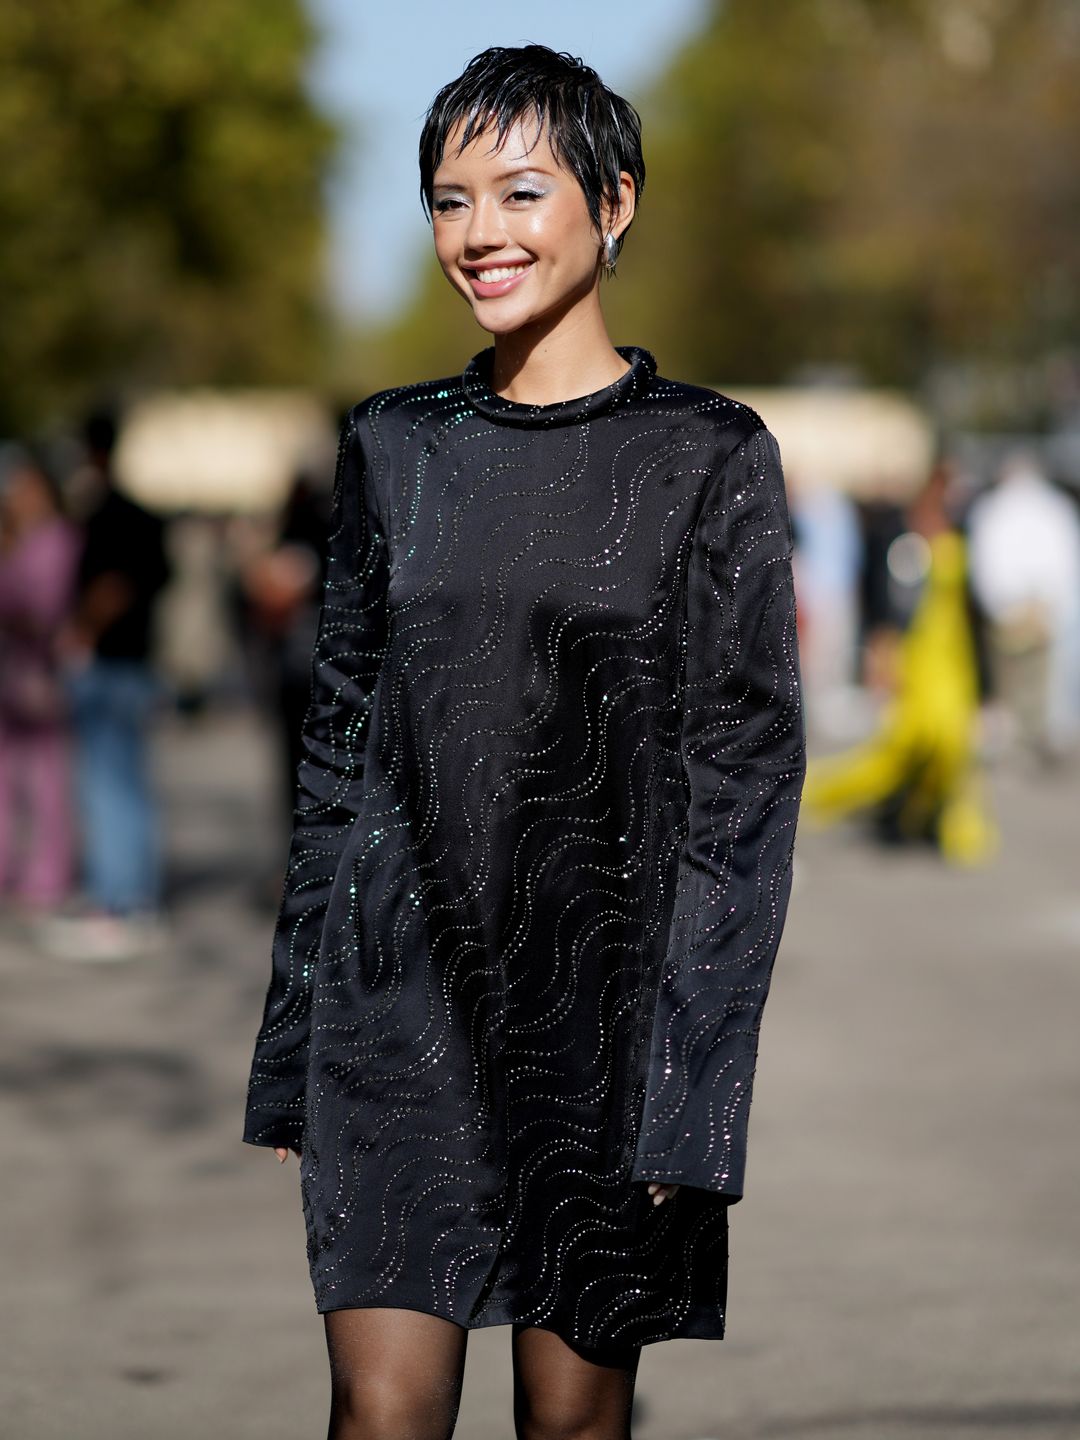 Khanh Linh shows off her 'whisper pixie' outside the Stella McCartney show during PFW